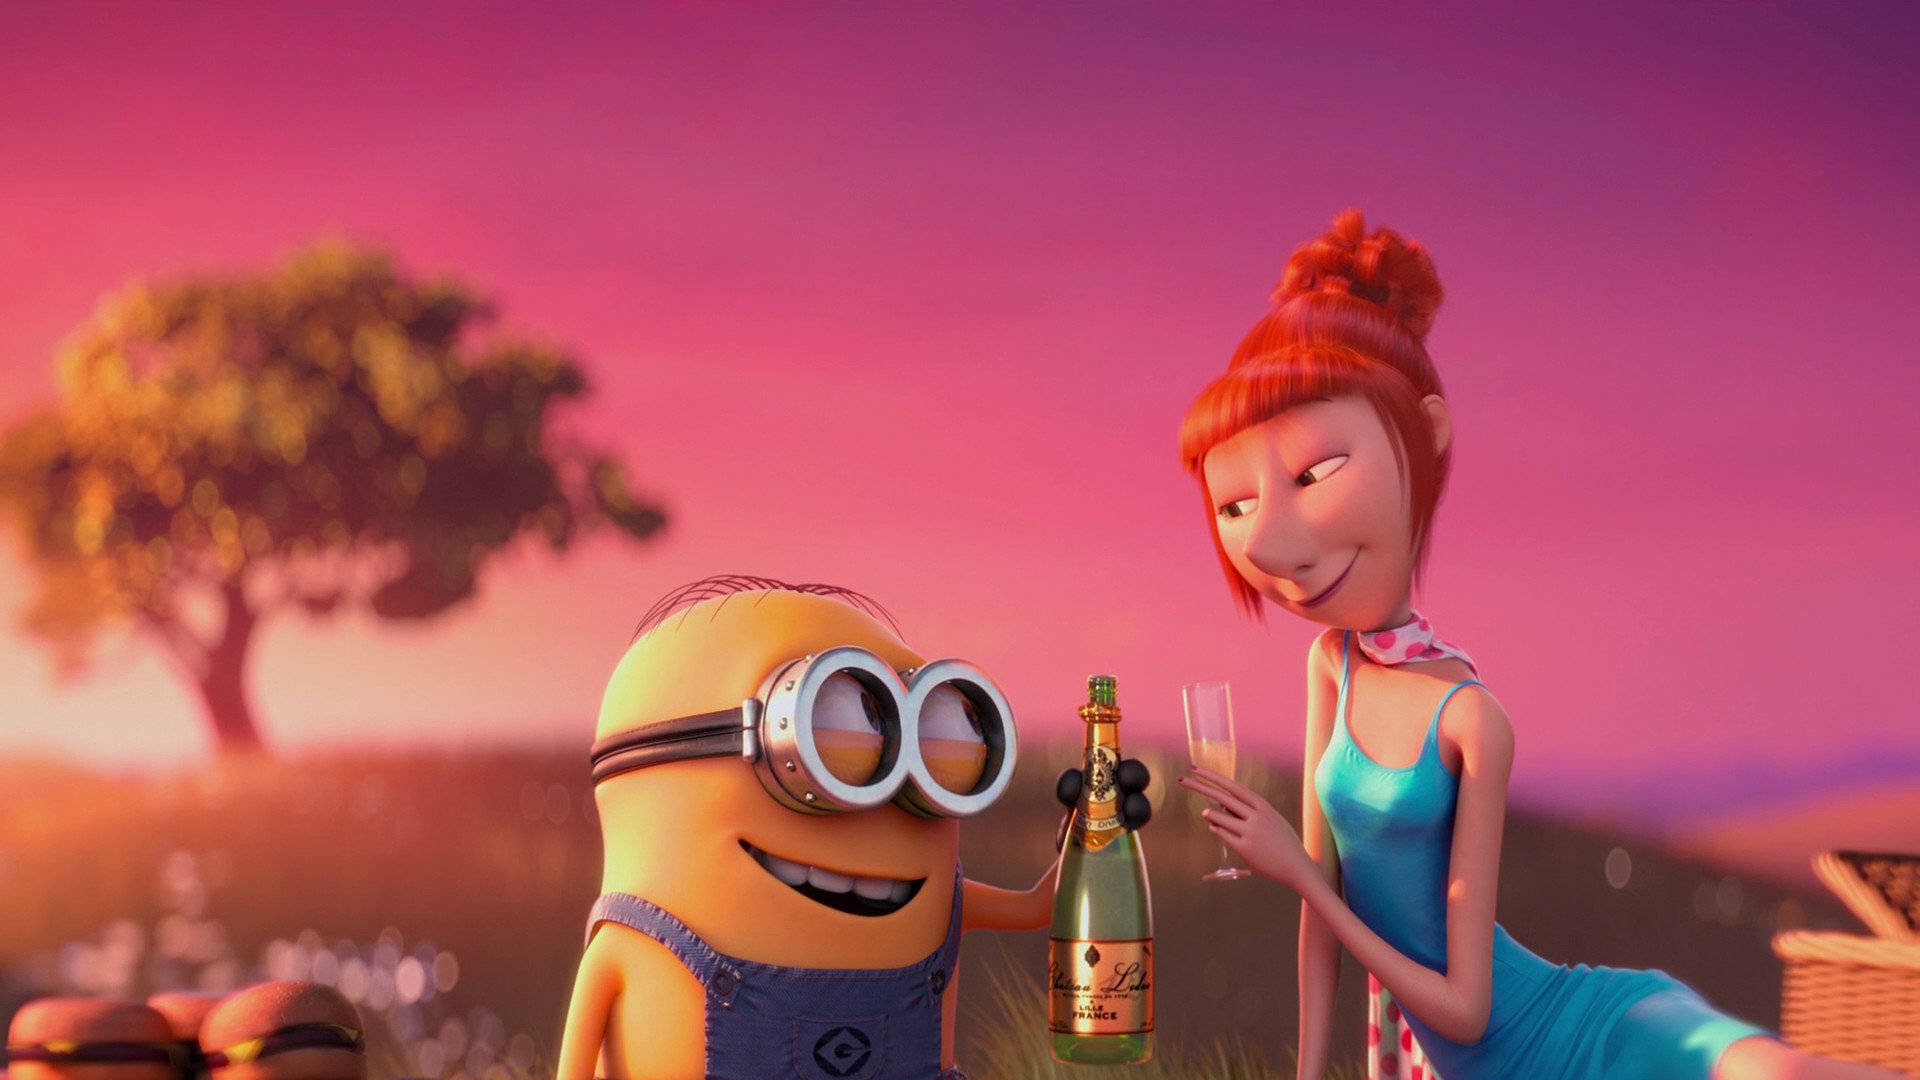 Dave Lucy Date Despicable Me 2 Wallpaper